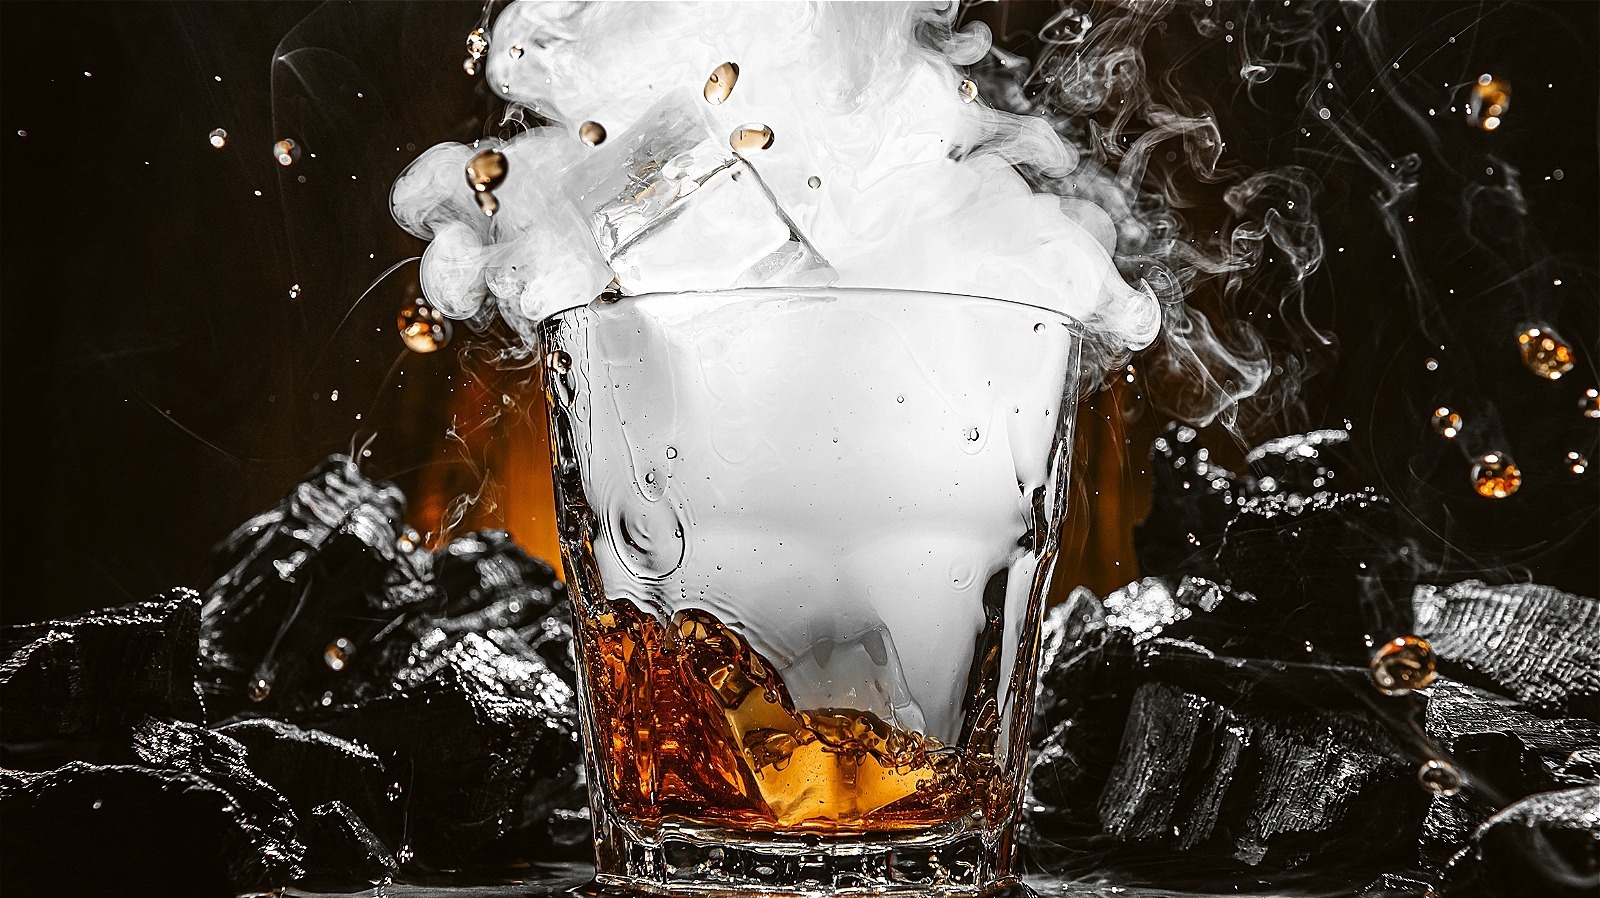 How To Safely Incorporate Dry Ice Into Your Cocktails